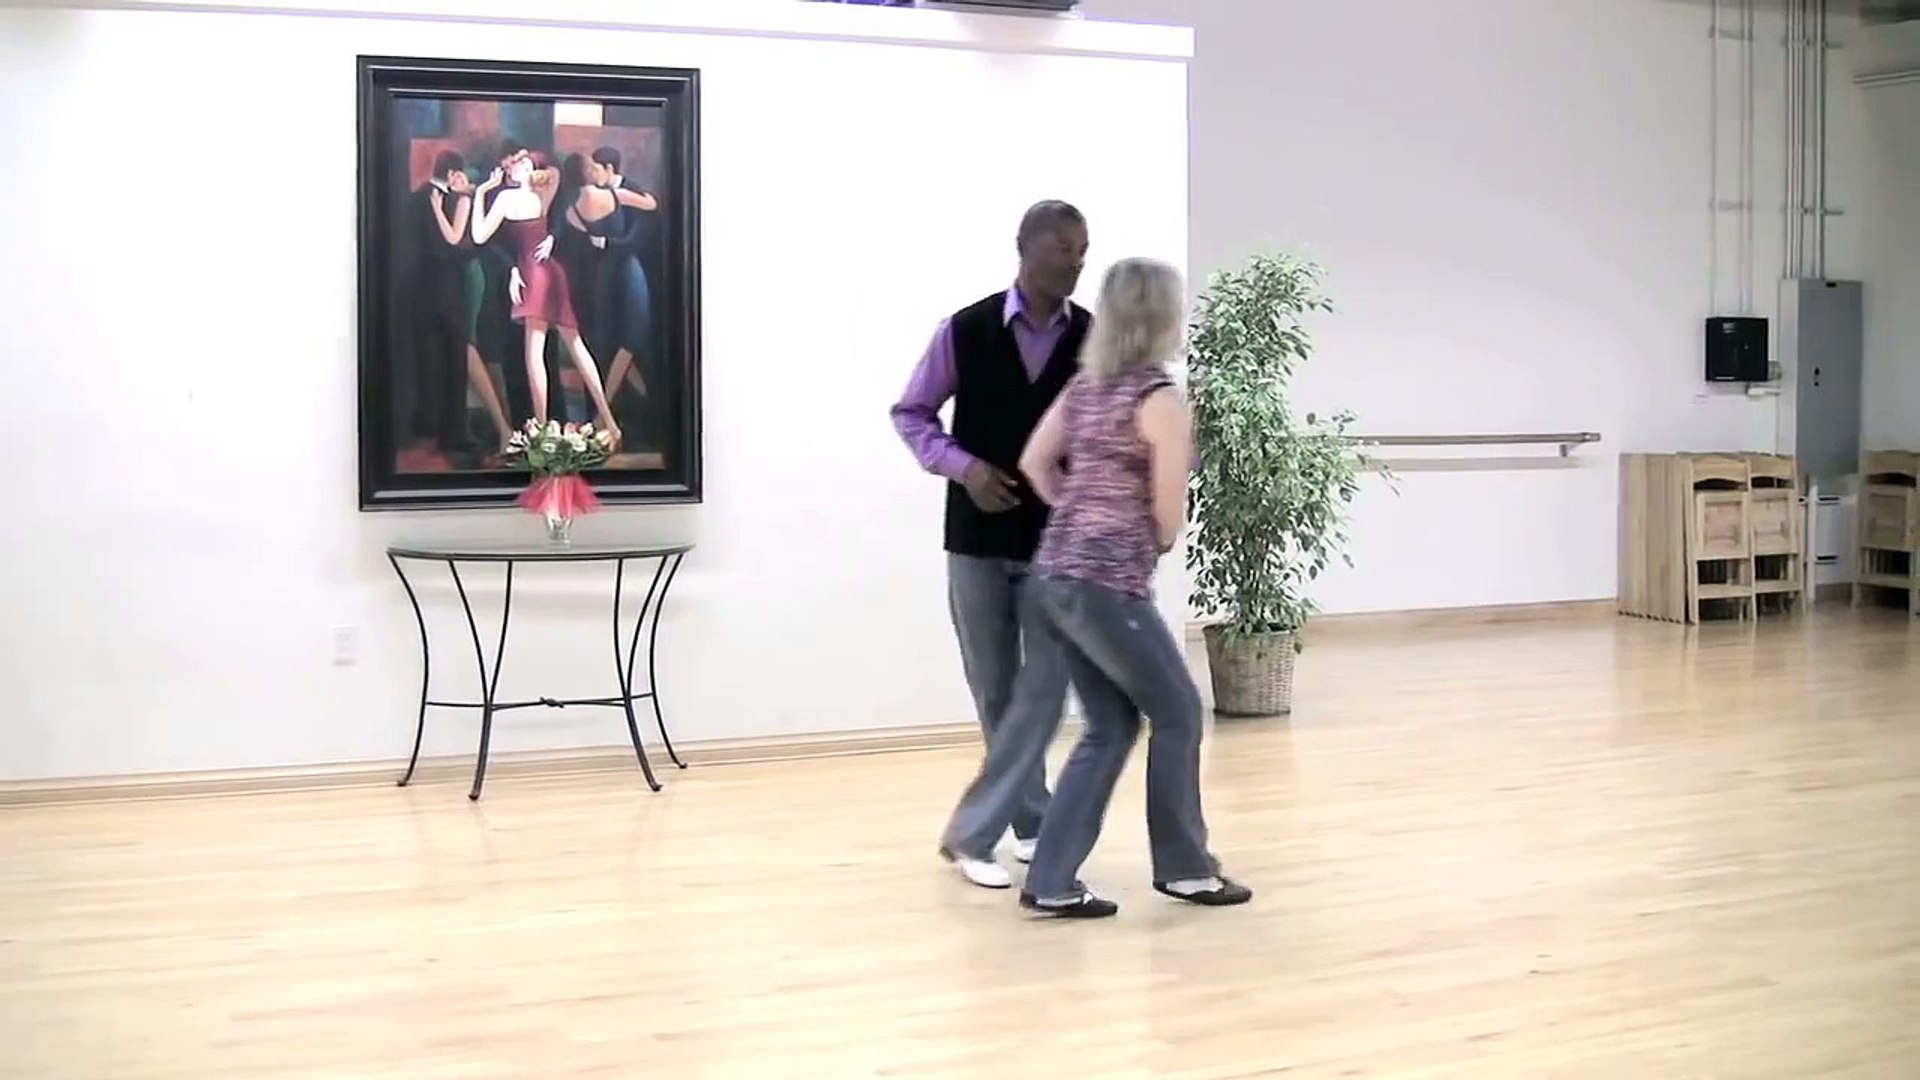 How to Dance the West Coast Swing : Demonstration of West Coast Swing Dance  Steps - Dailymotion Video